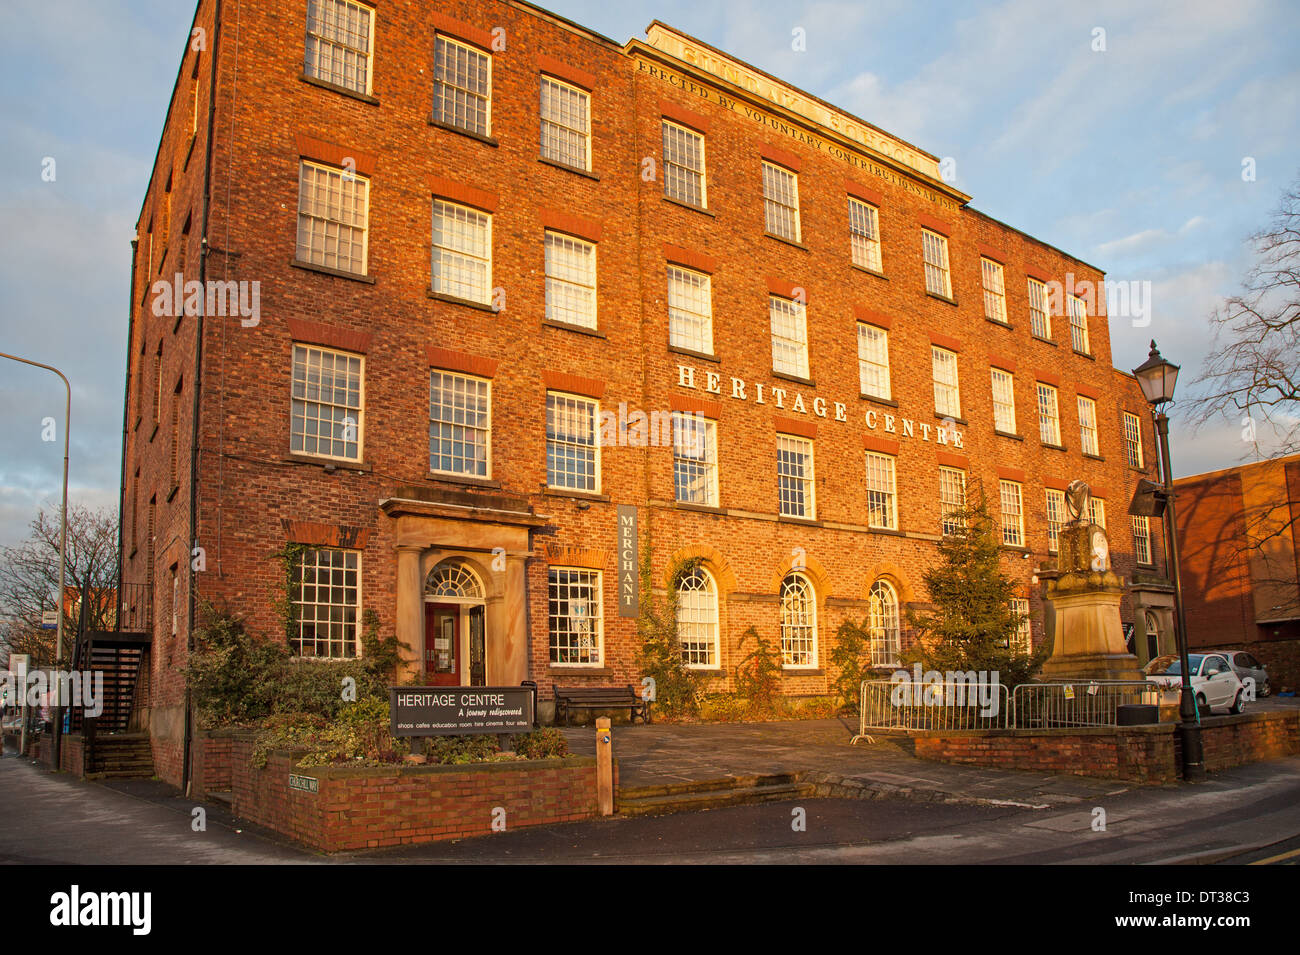 The Heritage Centre, home of the Silk Museum, Macclesfield Cheshire England UK Stock Photo